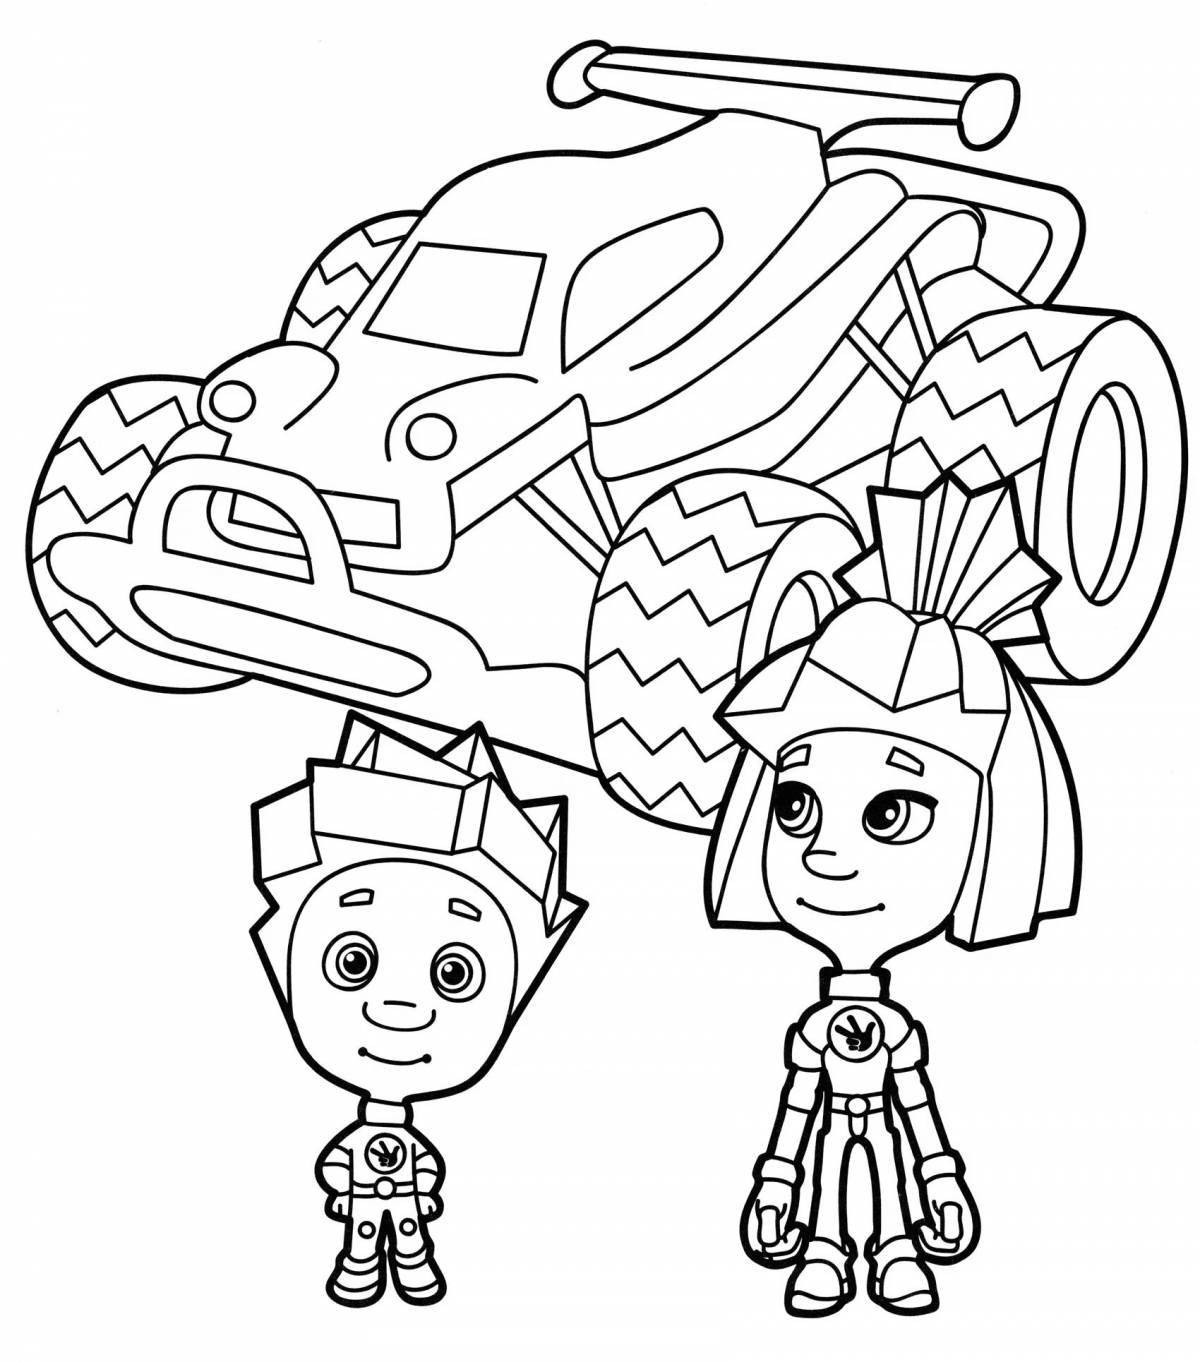 Luminous Fixies Coloring Pages for Girls